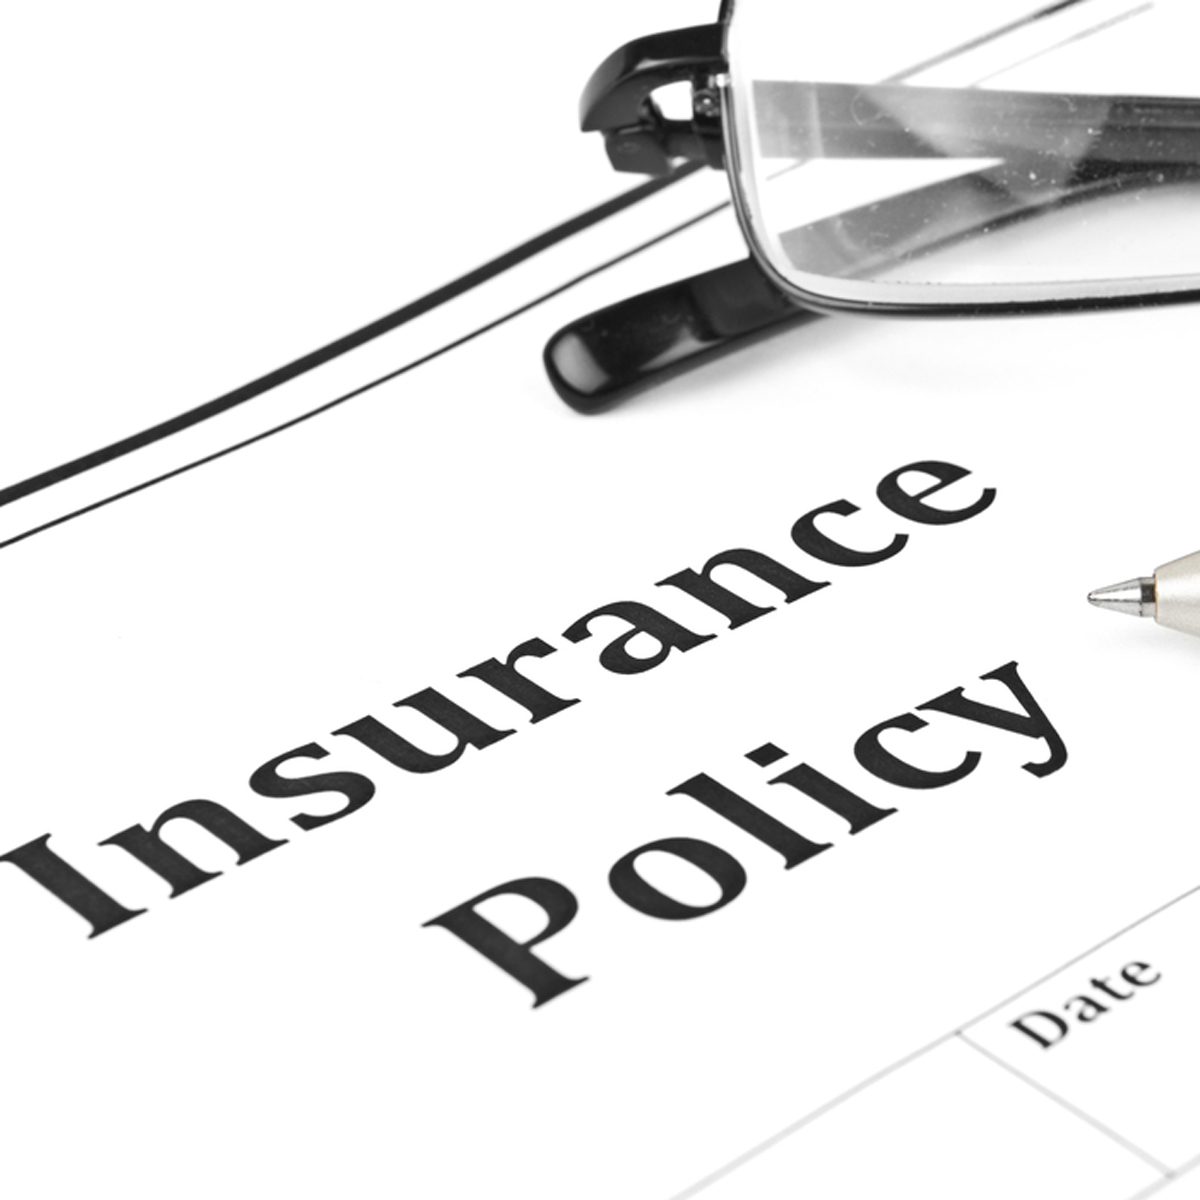 <p>With increased foot traffic coming through your home, make sure all your insurance coverage is up to date. Someone unfamiliar with your home could trip and fall, your dog could bite somebody and your pool could be a potential hazard. It’s always better to be safe than sorry.</p>